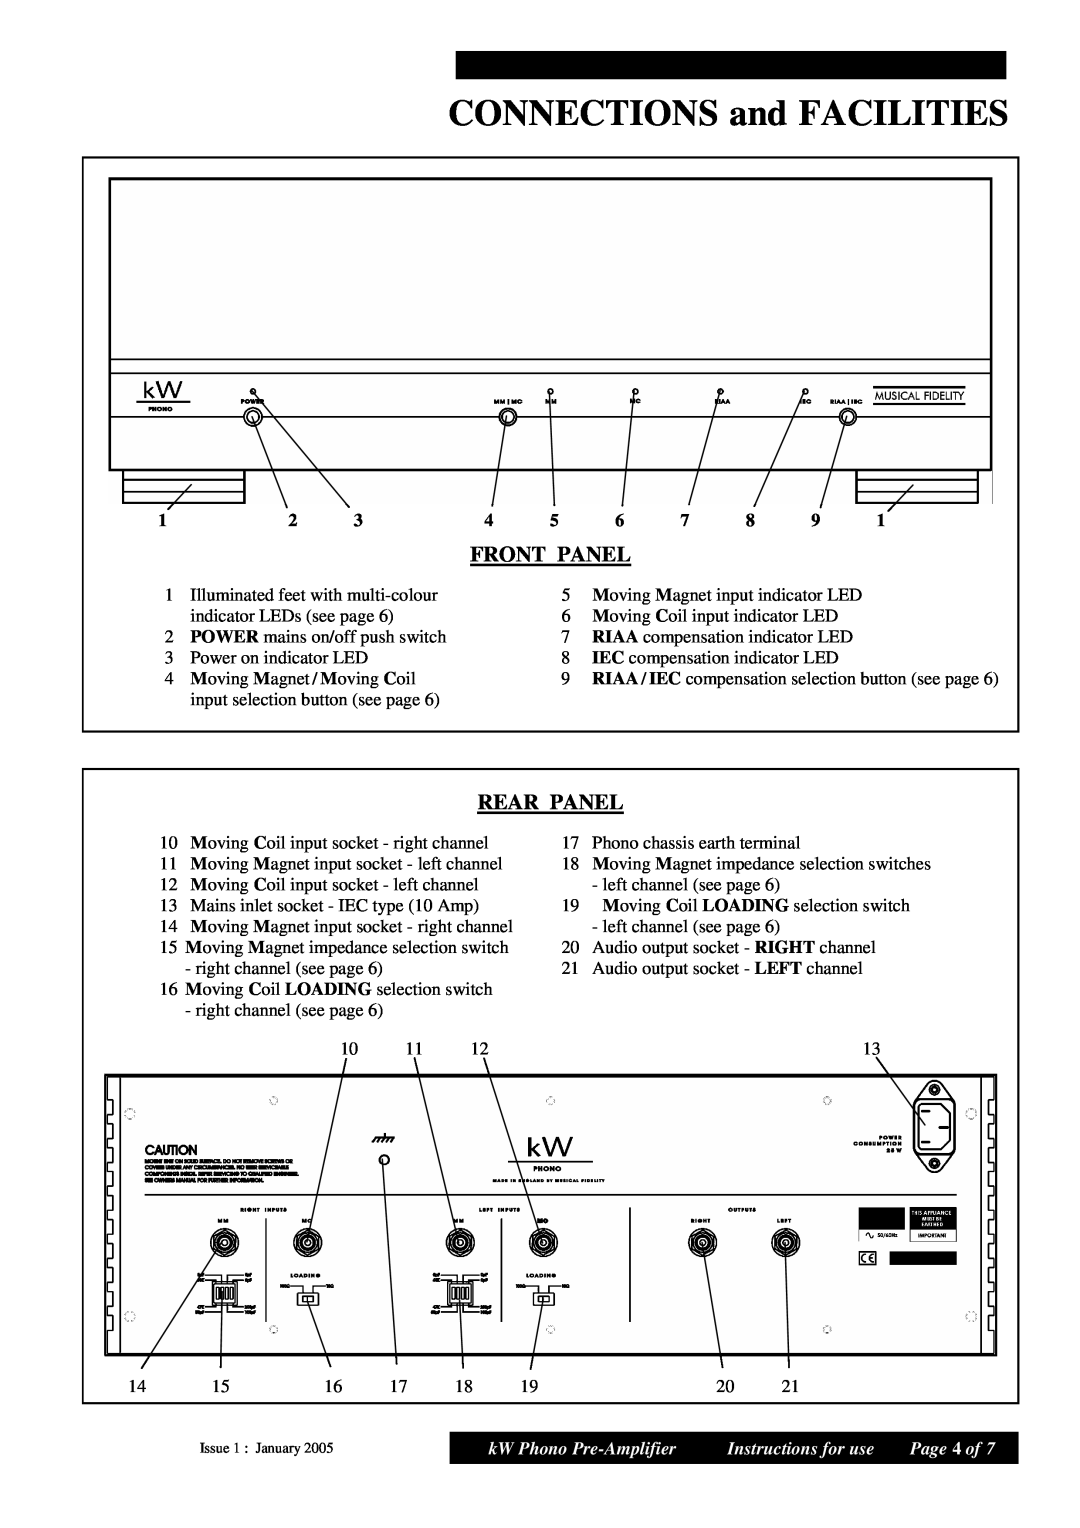 Musical Fidelity kW 750 CONNECTIONS and FACILITIES, Front Panel, Rear Panel, kW Phono Pre-Amplifier, Instructions for use 